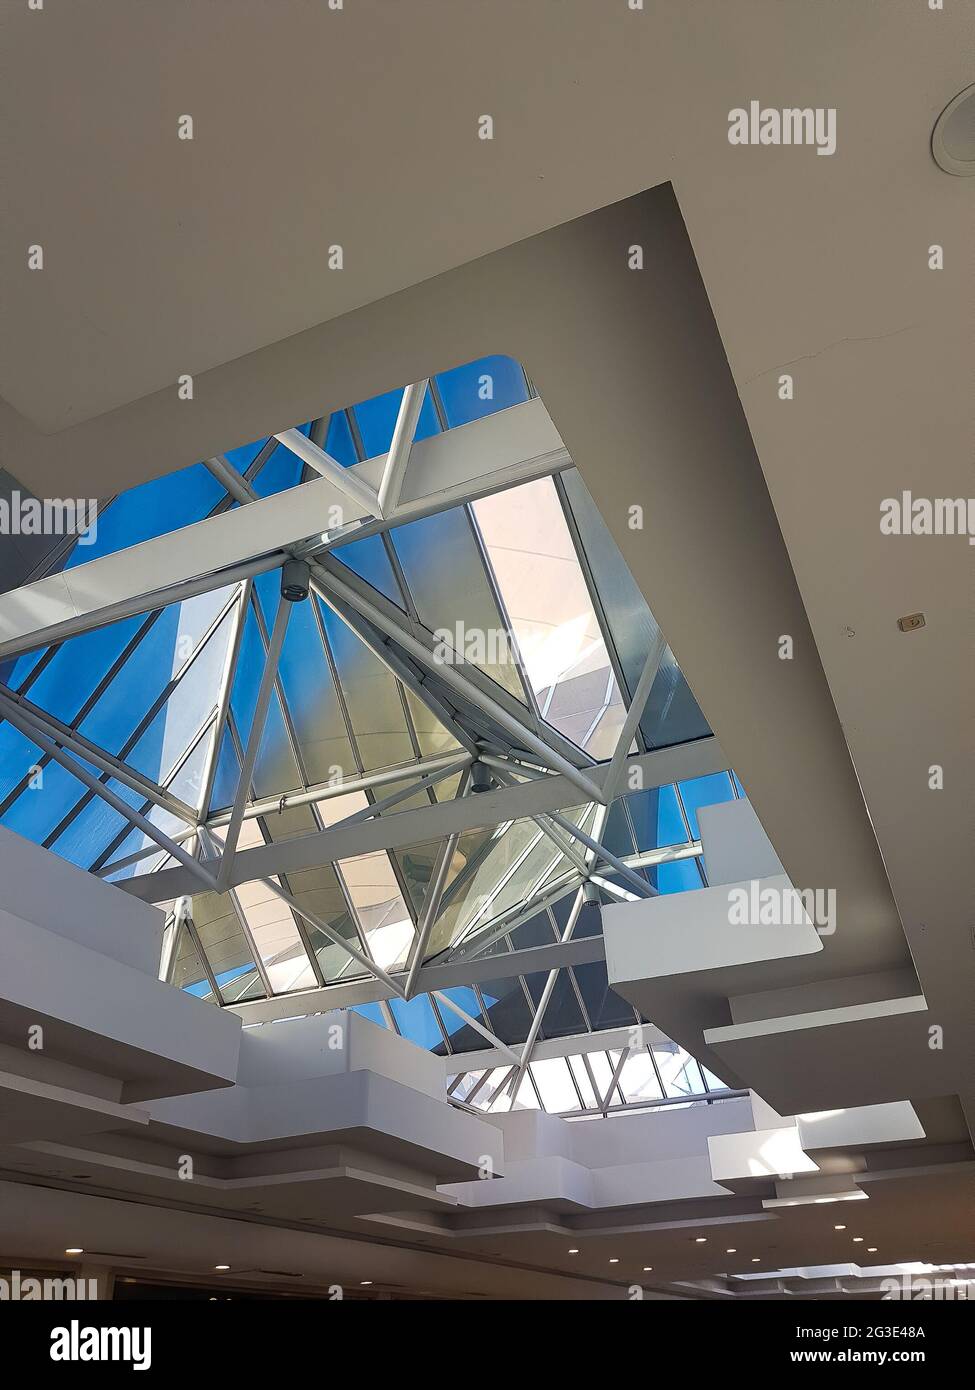 Madrid Spain; 05/11/2019: Interior ceiling of a modern building Stock Photo